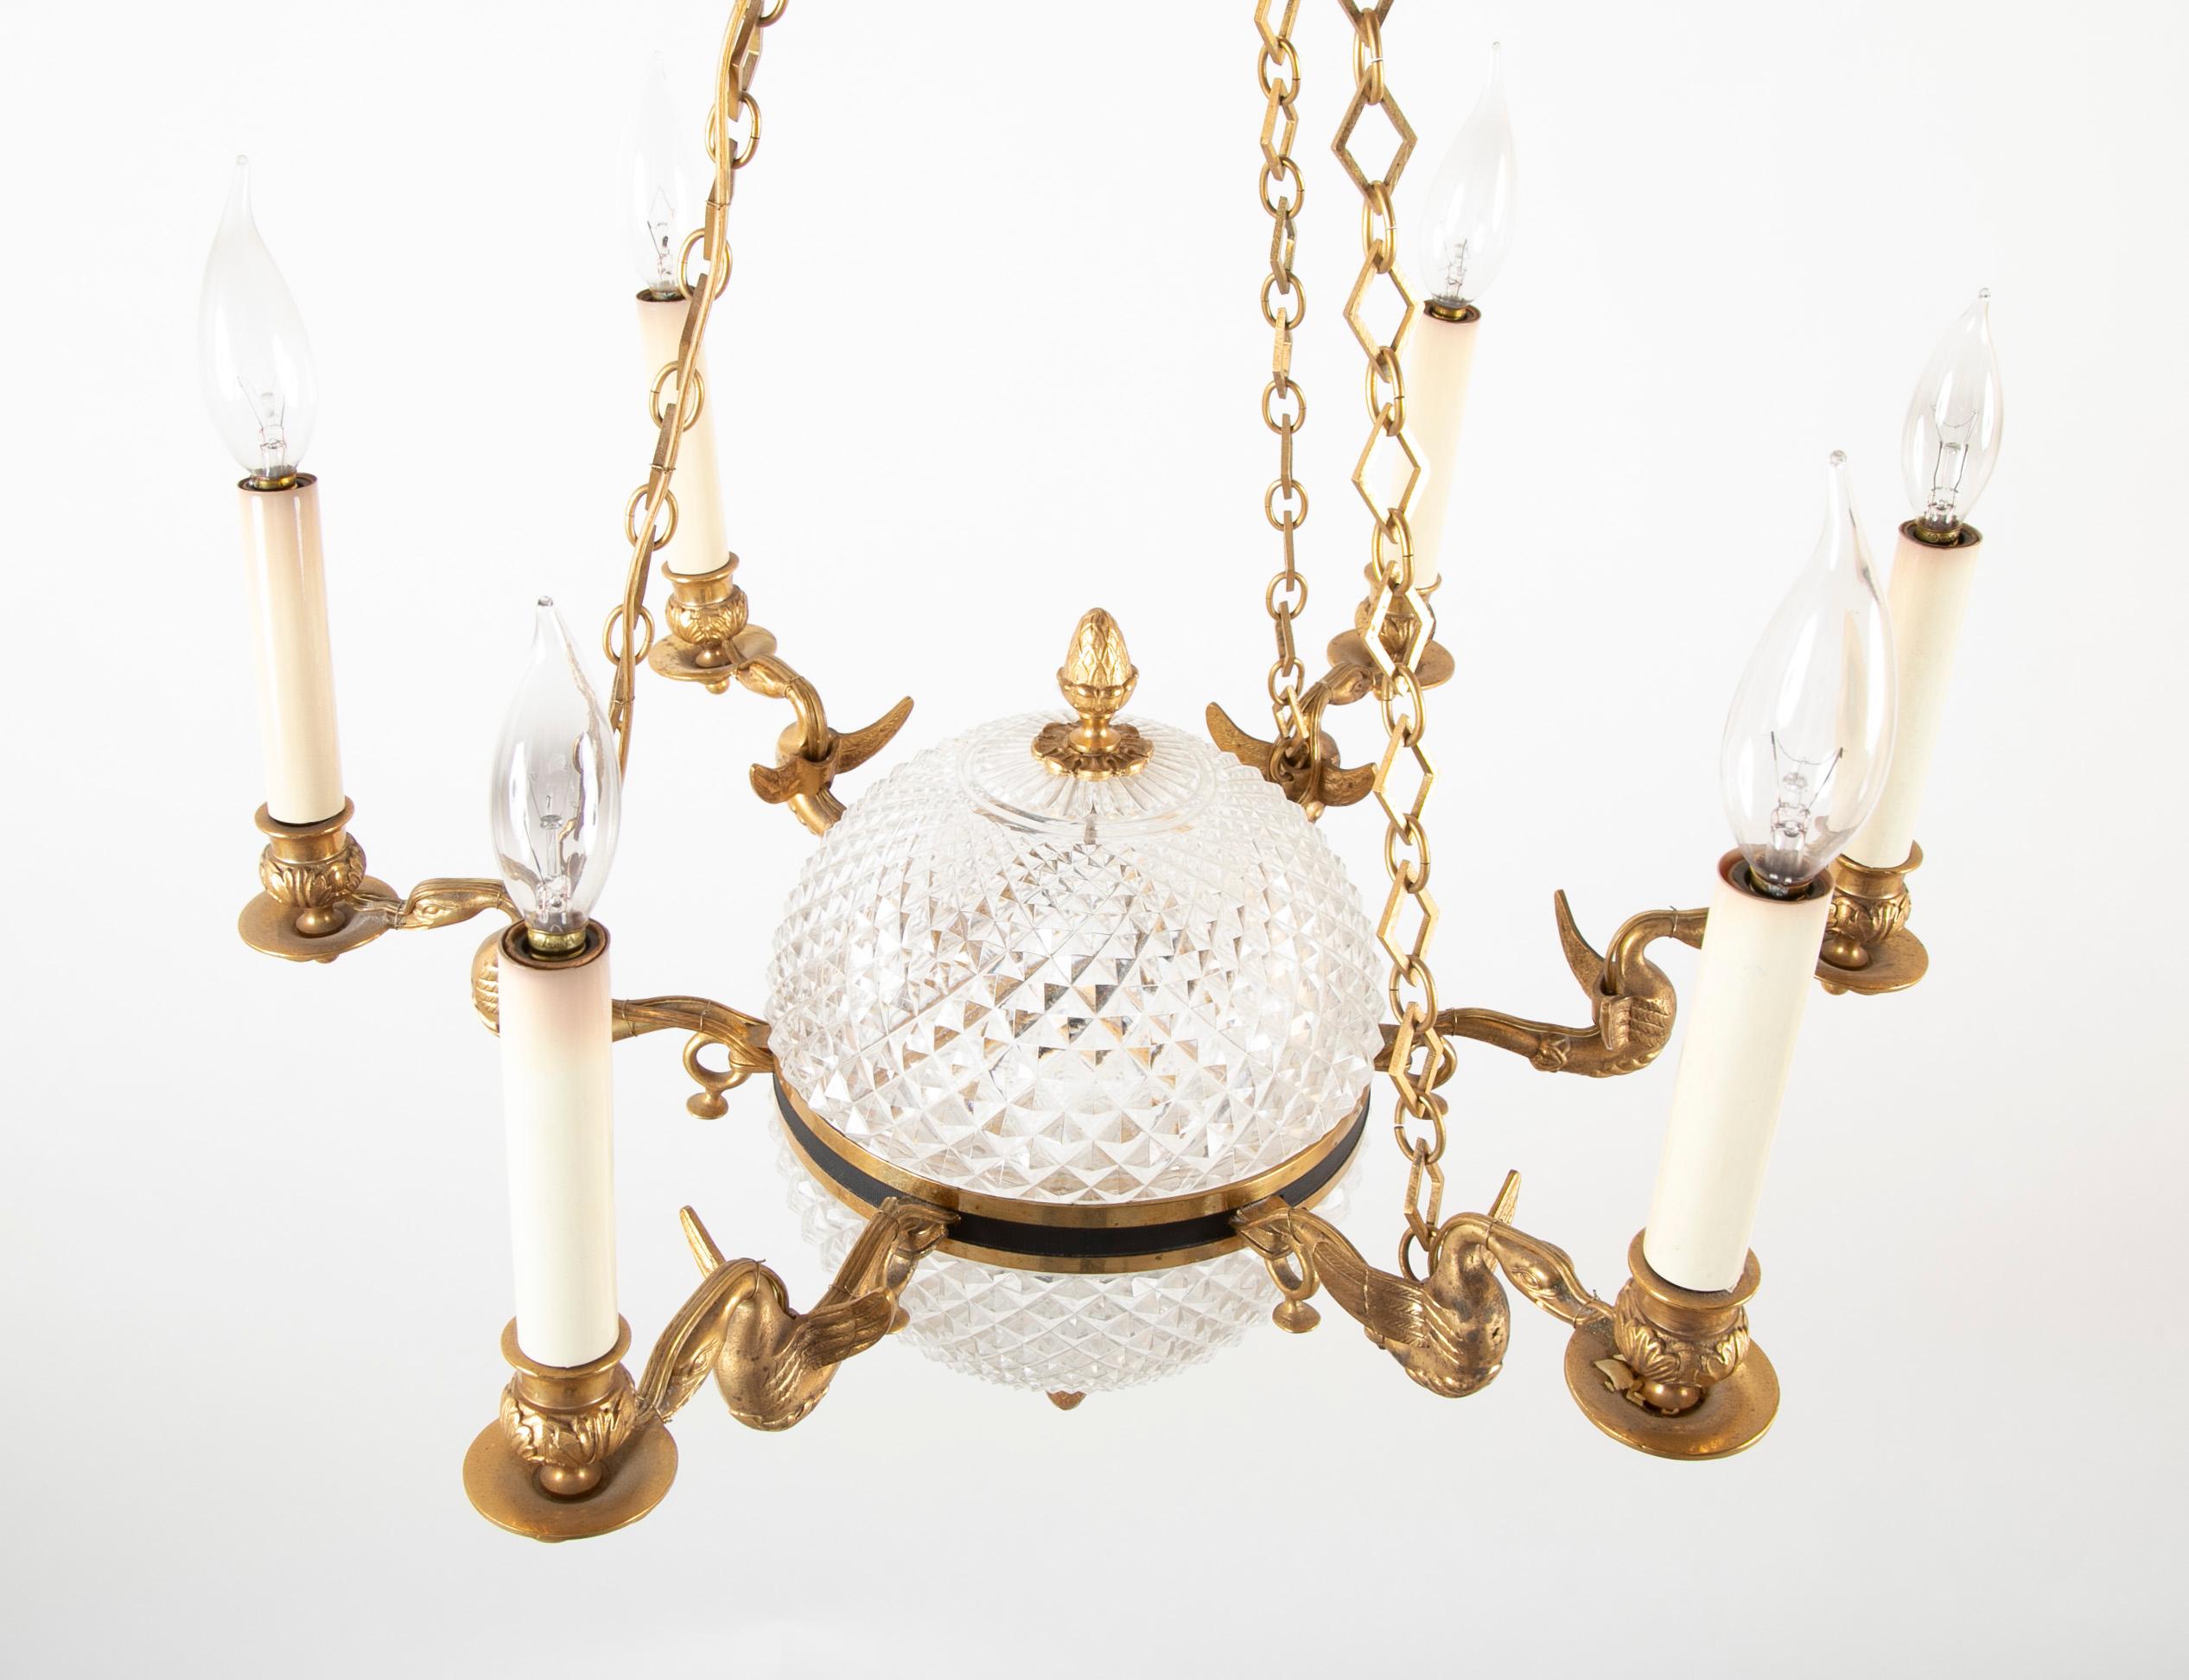 Cut Crystal Chandelier with Central Globe, Swan Arms and Elaborate Crown 6